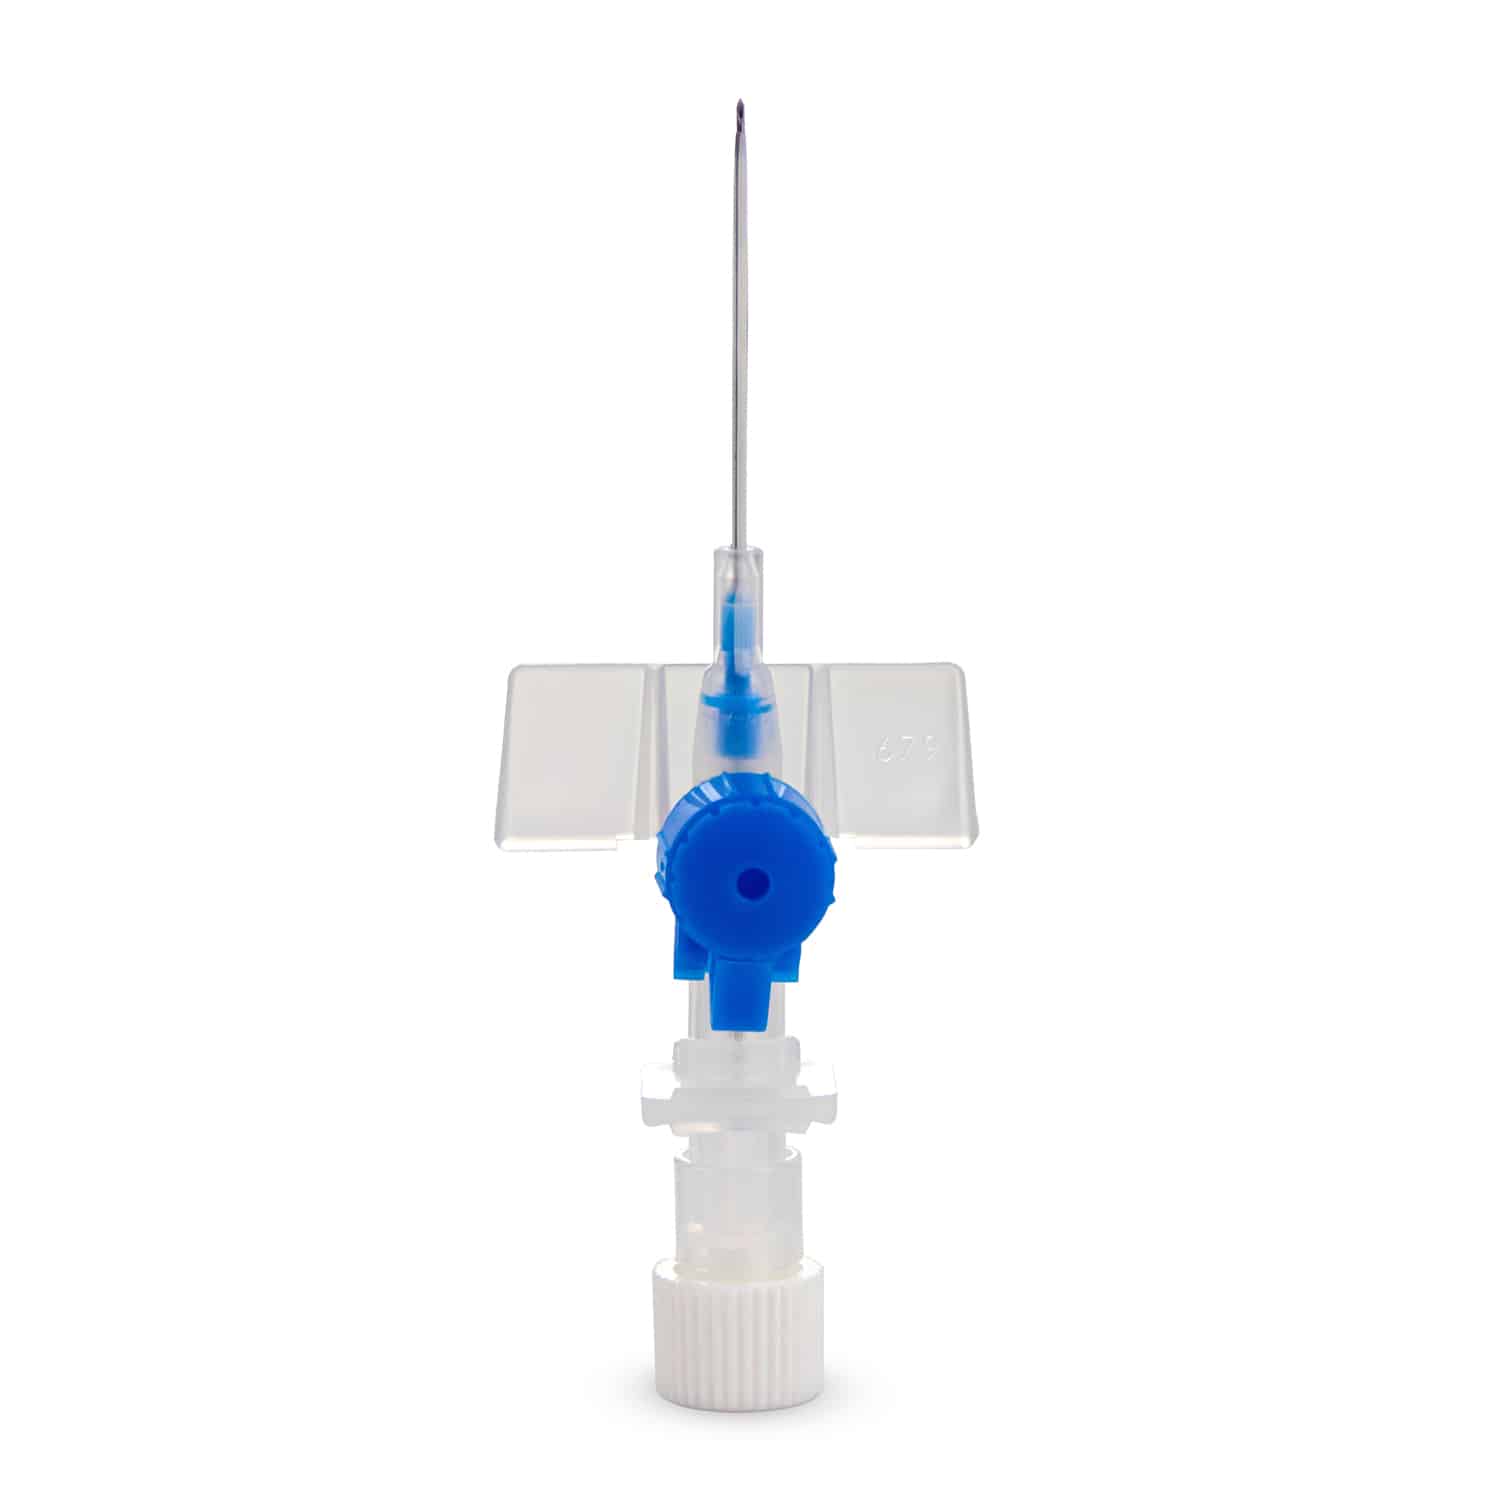  Vasuflo®Int Ptfe Safety Intravenous Catheter With Injection Port